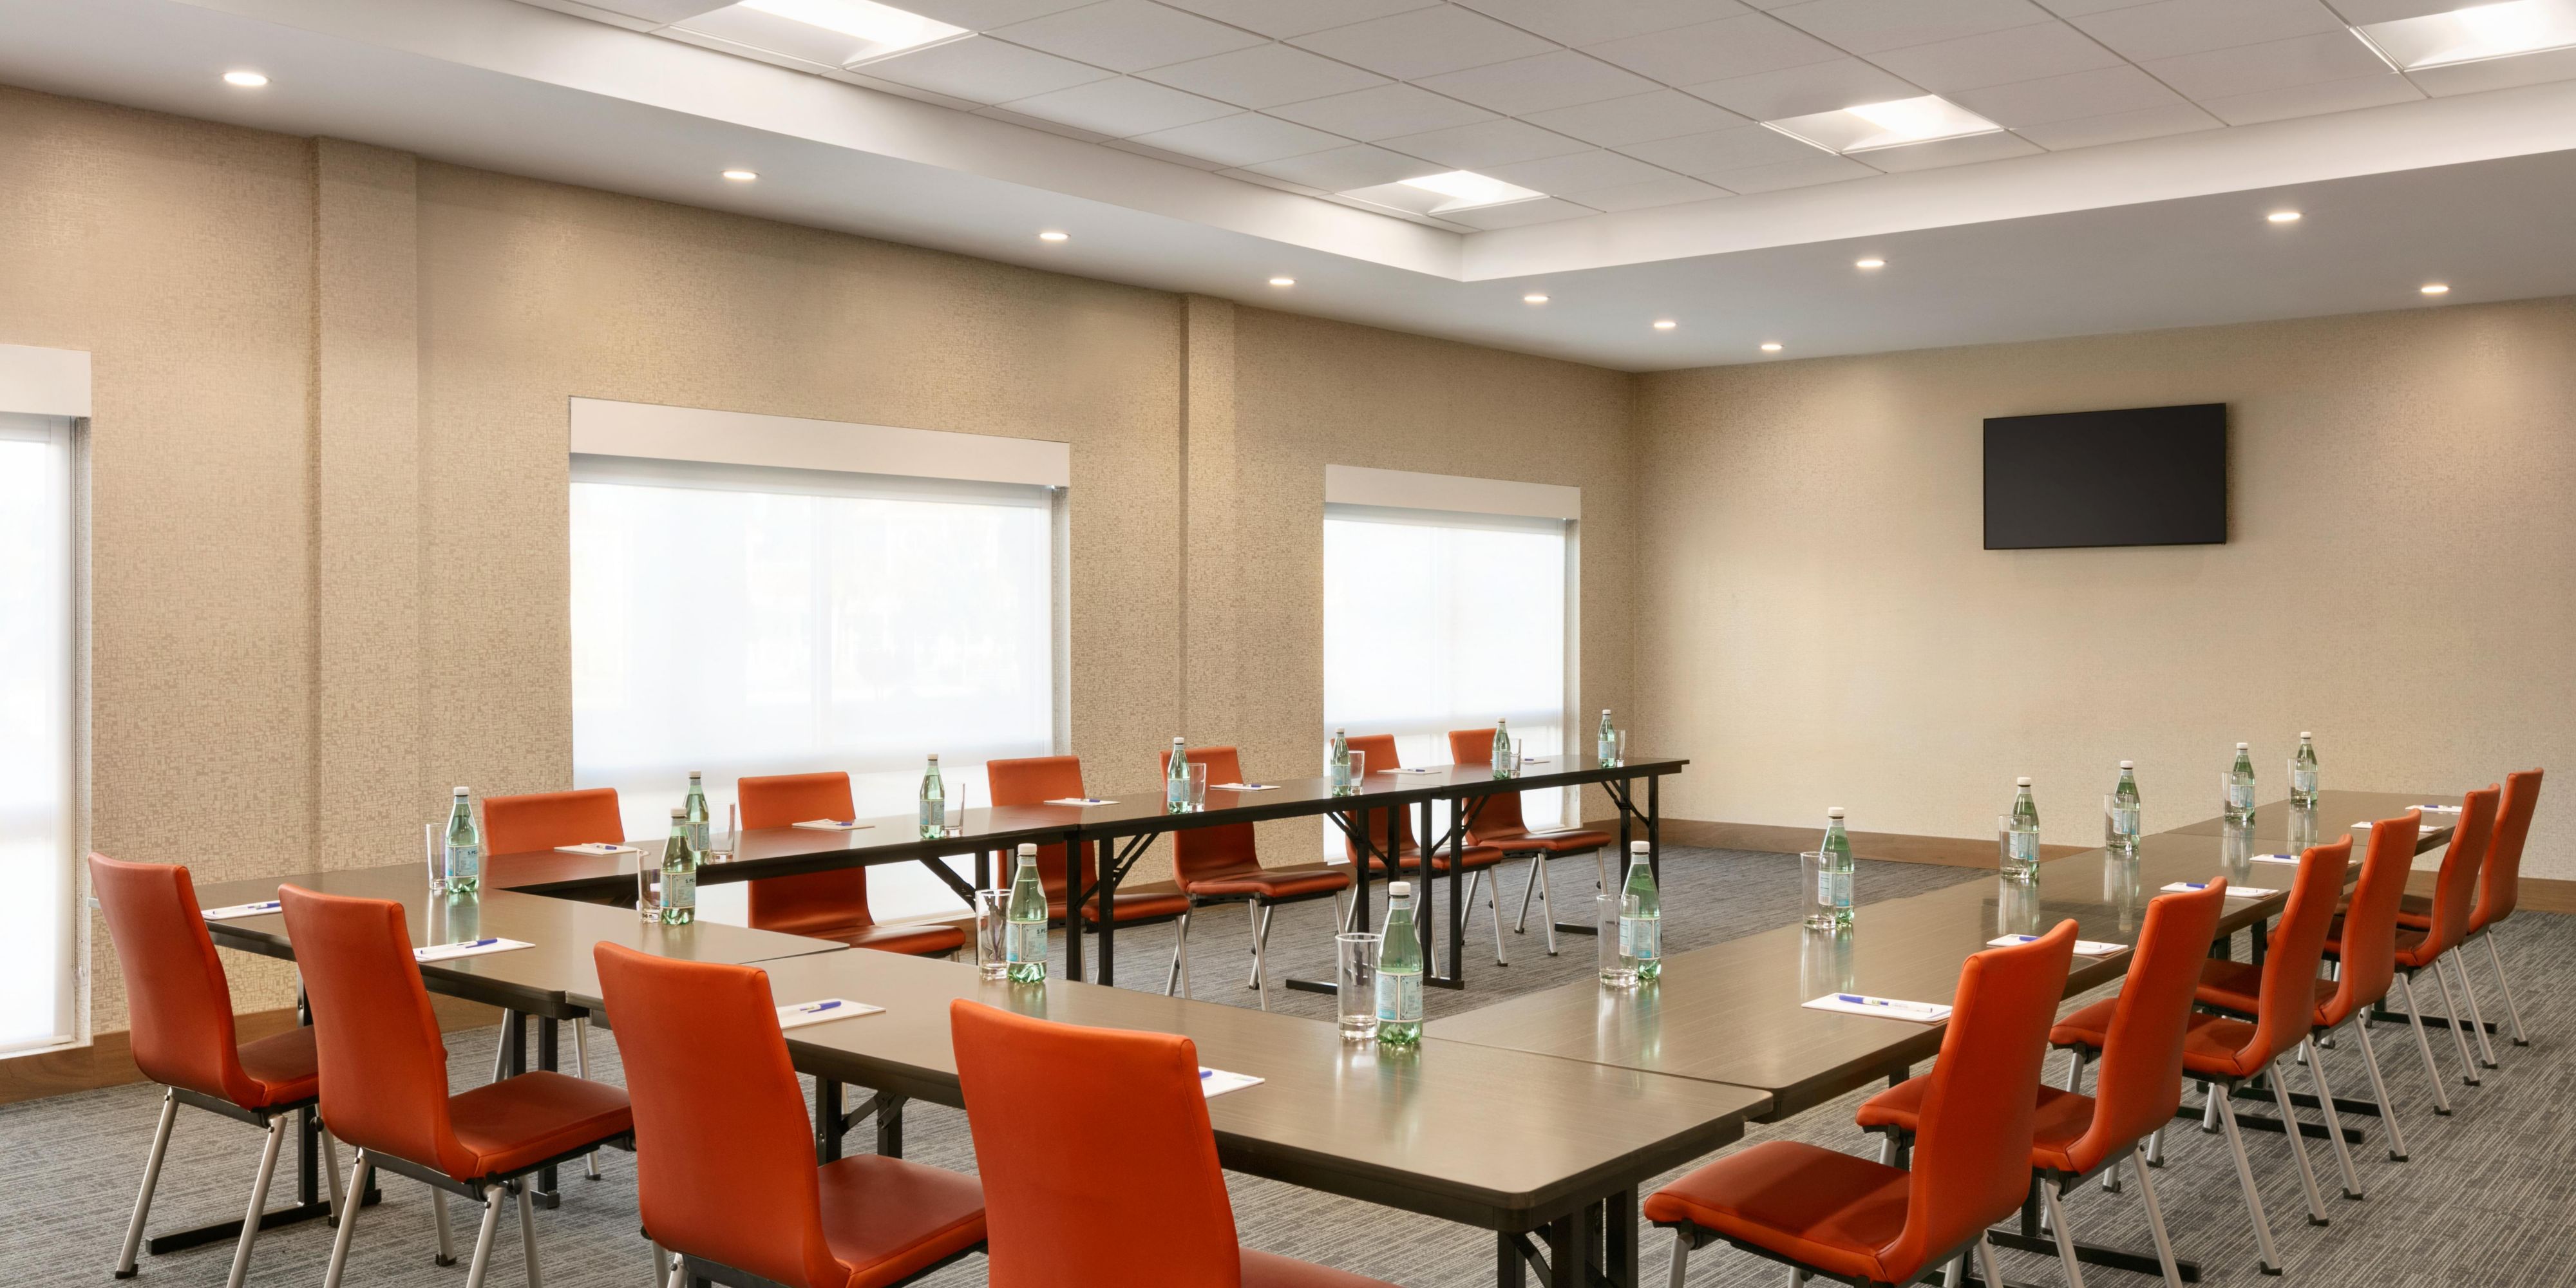 Host your next meeting or event with us in our customizable meeting space with max occupancy of 50ppl.  Contact our staff to schedule your next event with us.